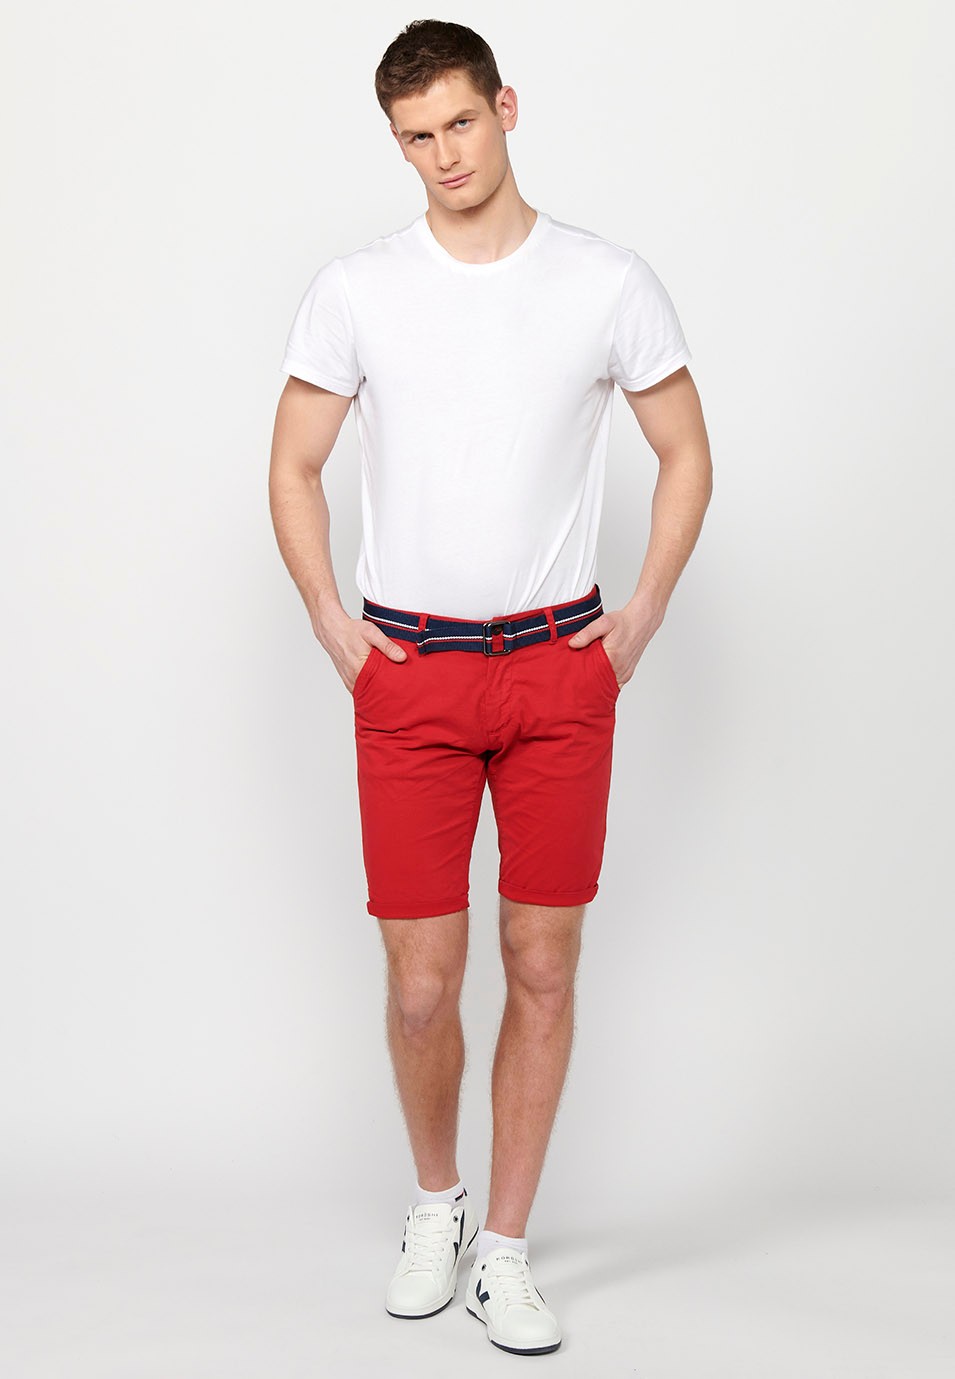 Shorts with cuffed finish with front closure with zipper and button and belt in Red for Men